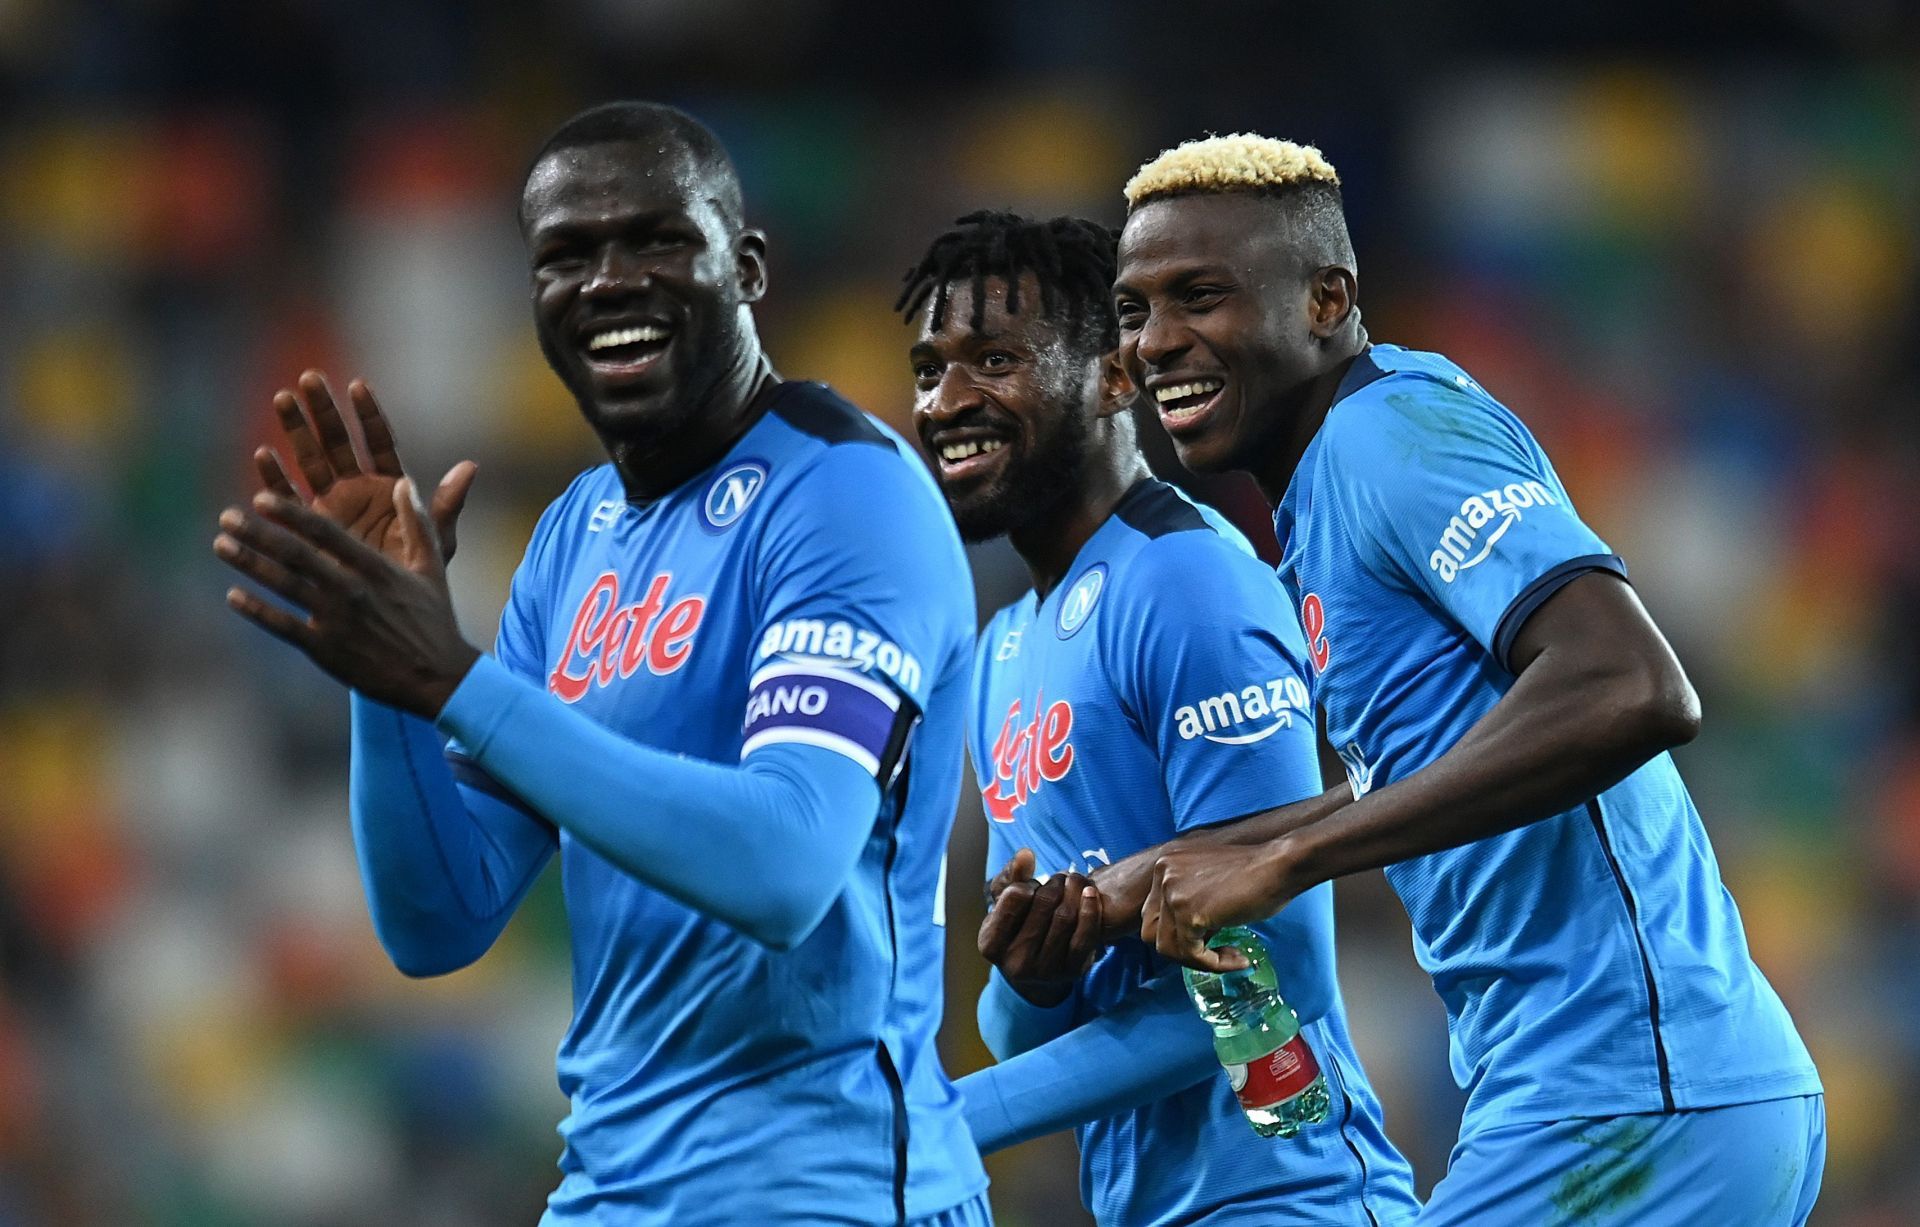 Napoli are set to miss up to four regulars due to AFCON